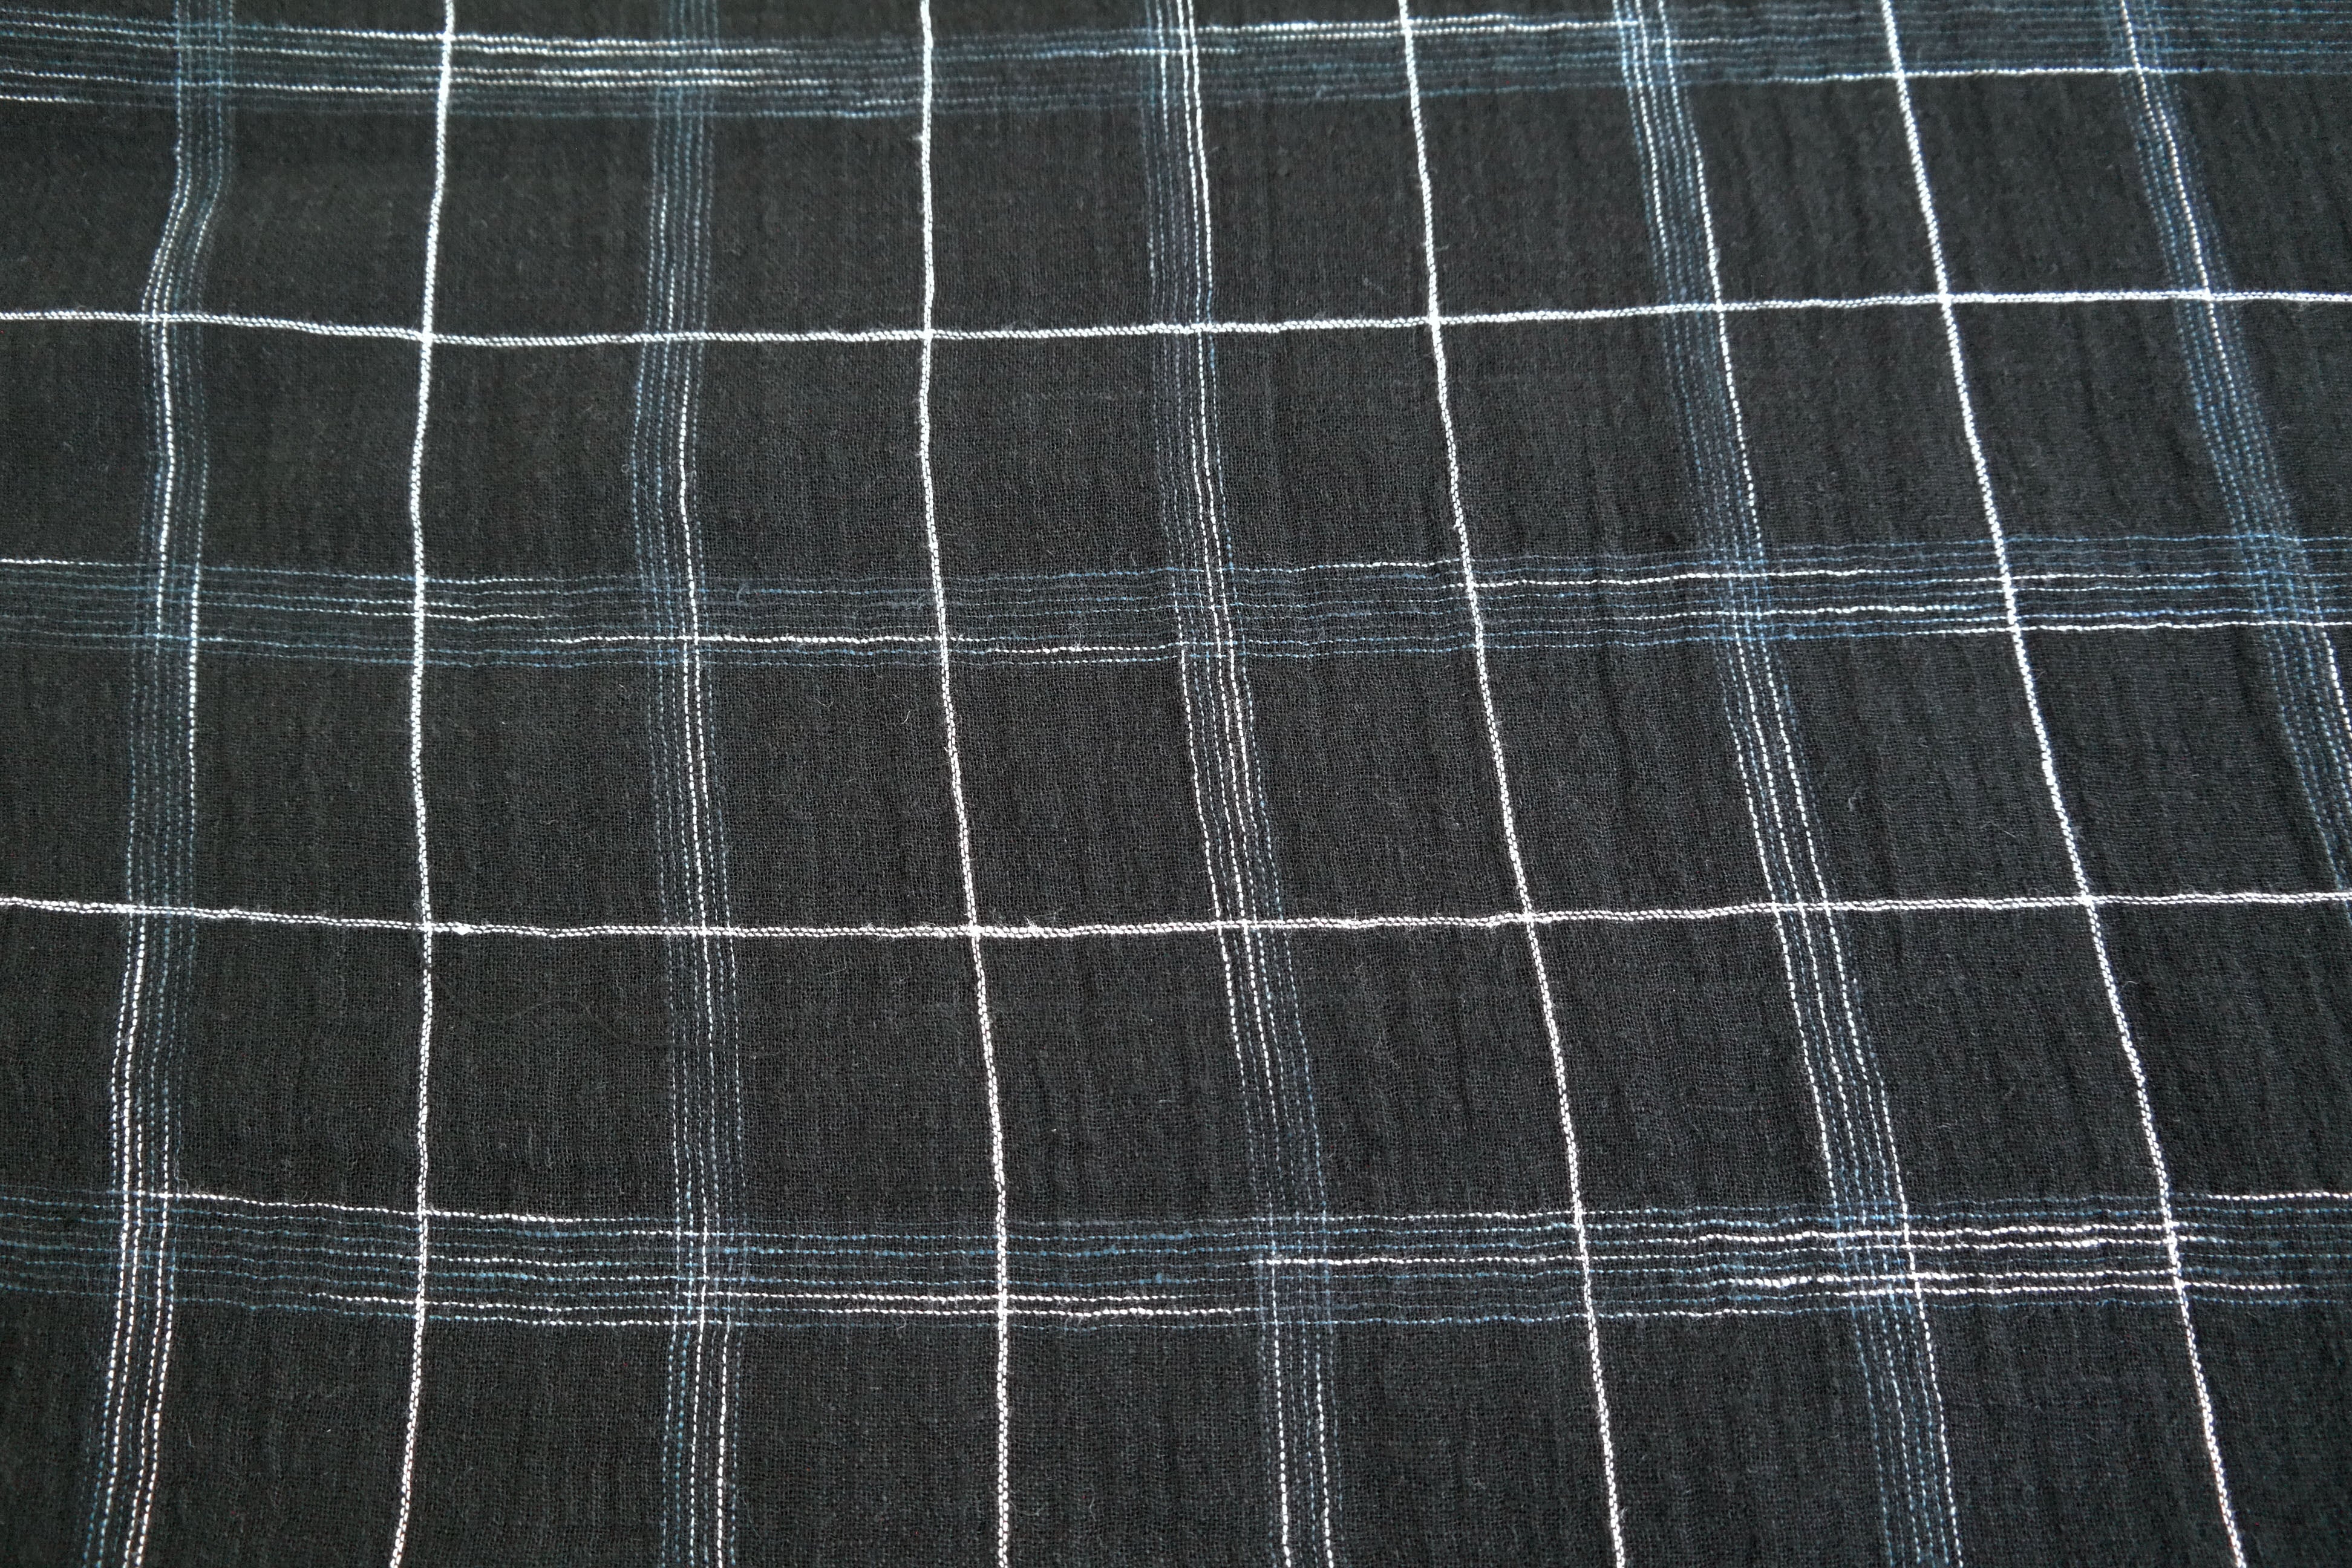 High Twisted Linen Fabric with Wrinkle Effect -Spaced Dyed Windowpane Check 6645 6688 - The Linen Lab - BLACK 6645